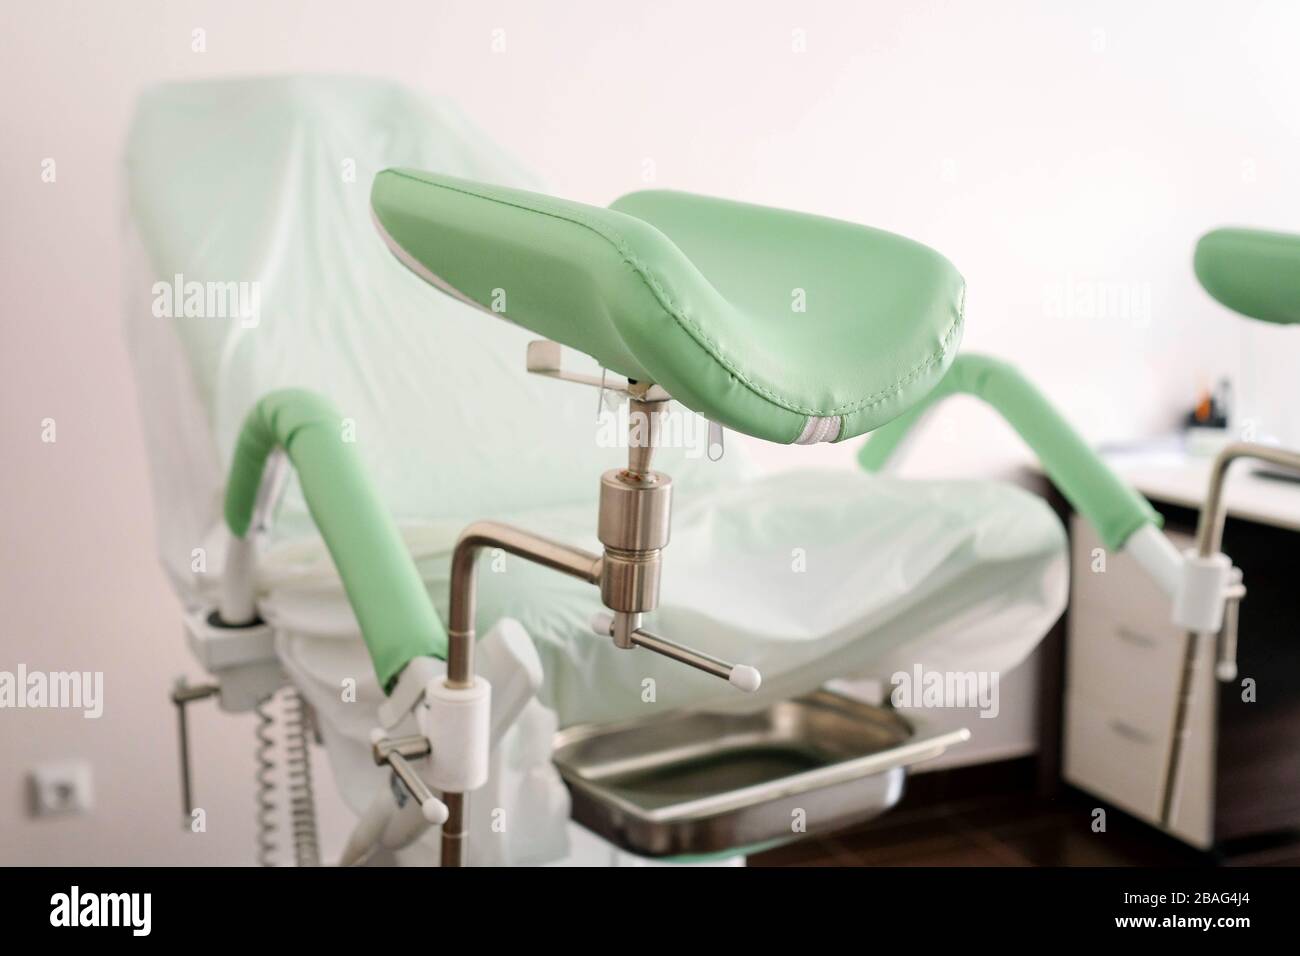 Gynecological chair with green footrests. Doctors office. Stock Photo